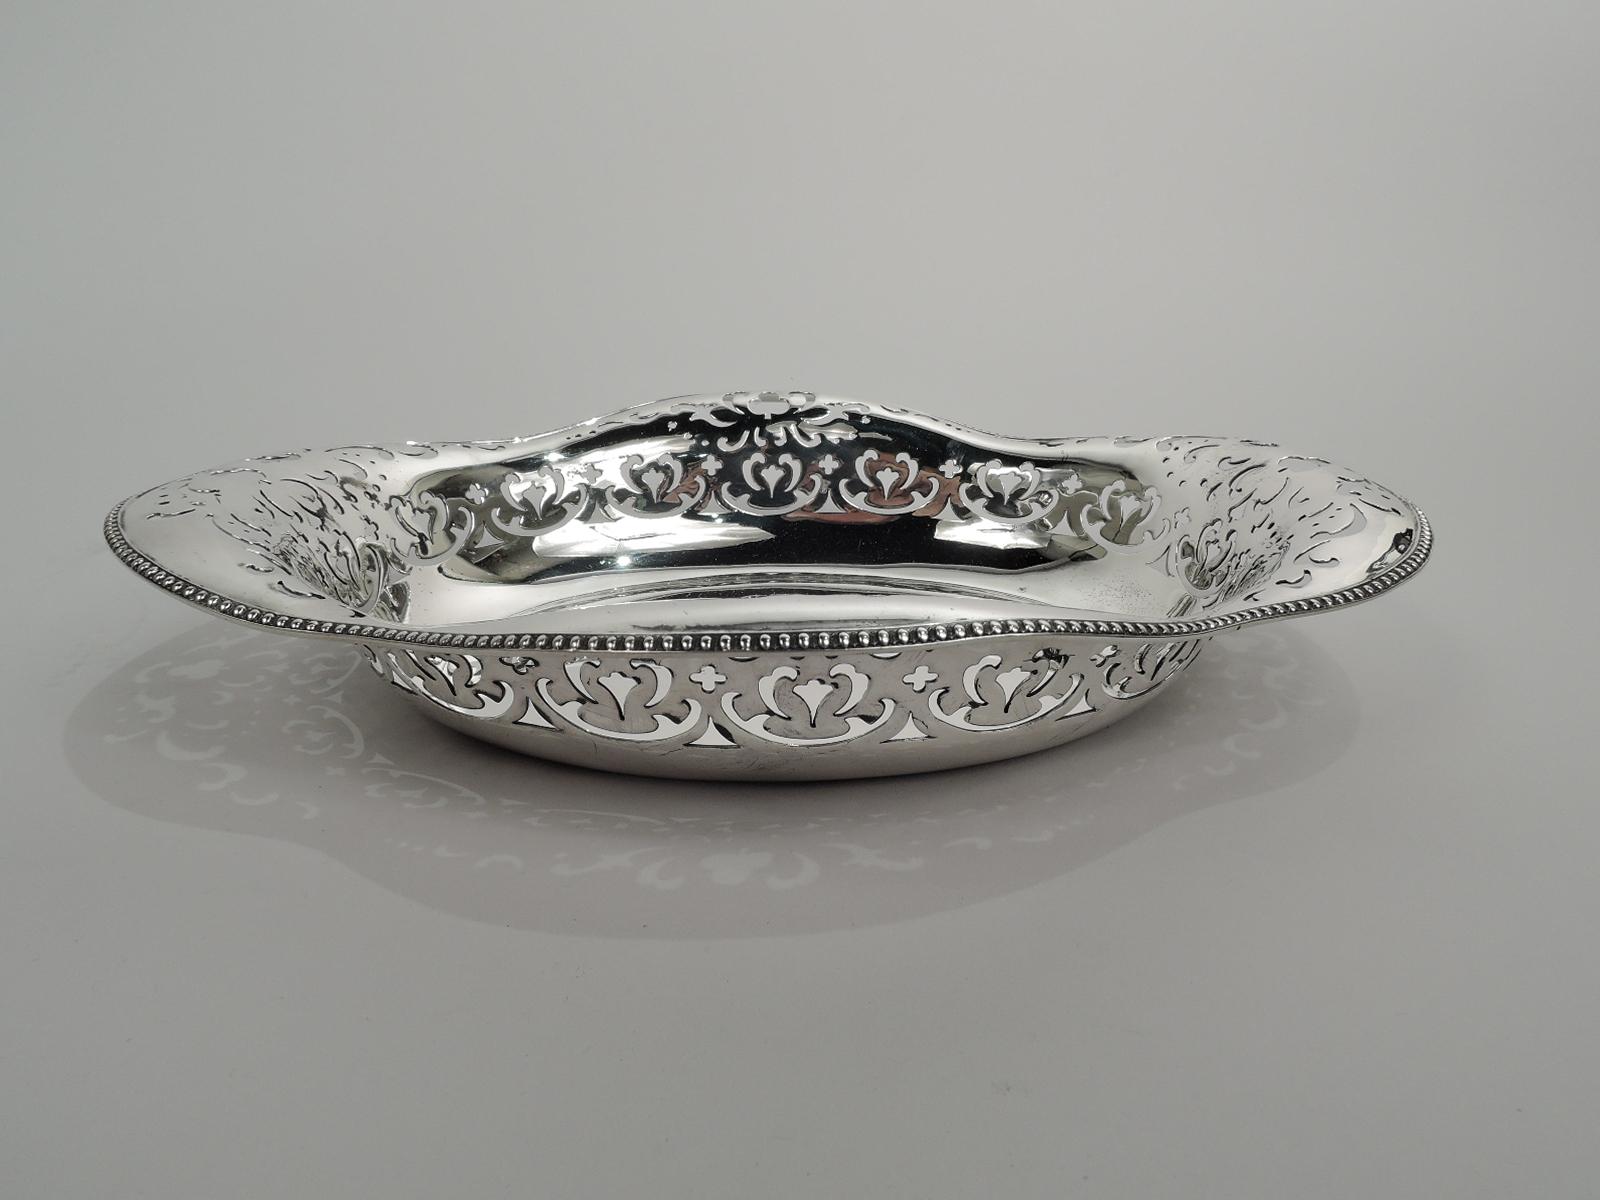 Edwardian sterling silver bowl. Made by Tiffany & Co. in New York, ca 1910. Solid oval well and lobed and beaded quatrefoil rim. Ornamental piercing. Fully marked including maker’s stamp, pattern no. 15827, and director’s letter m. Weight: 13.5 troy